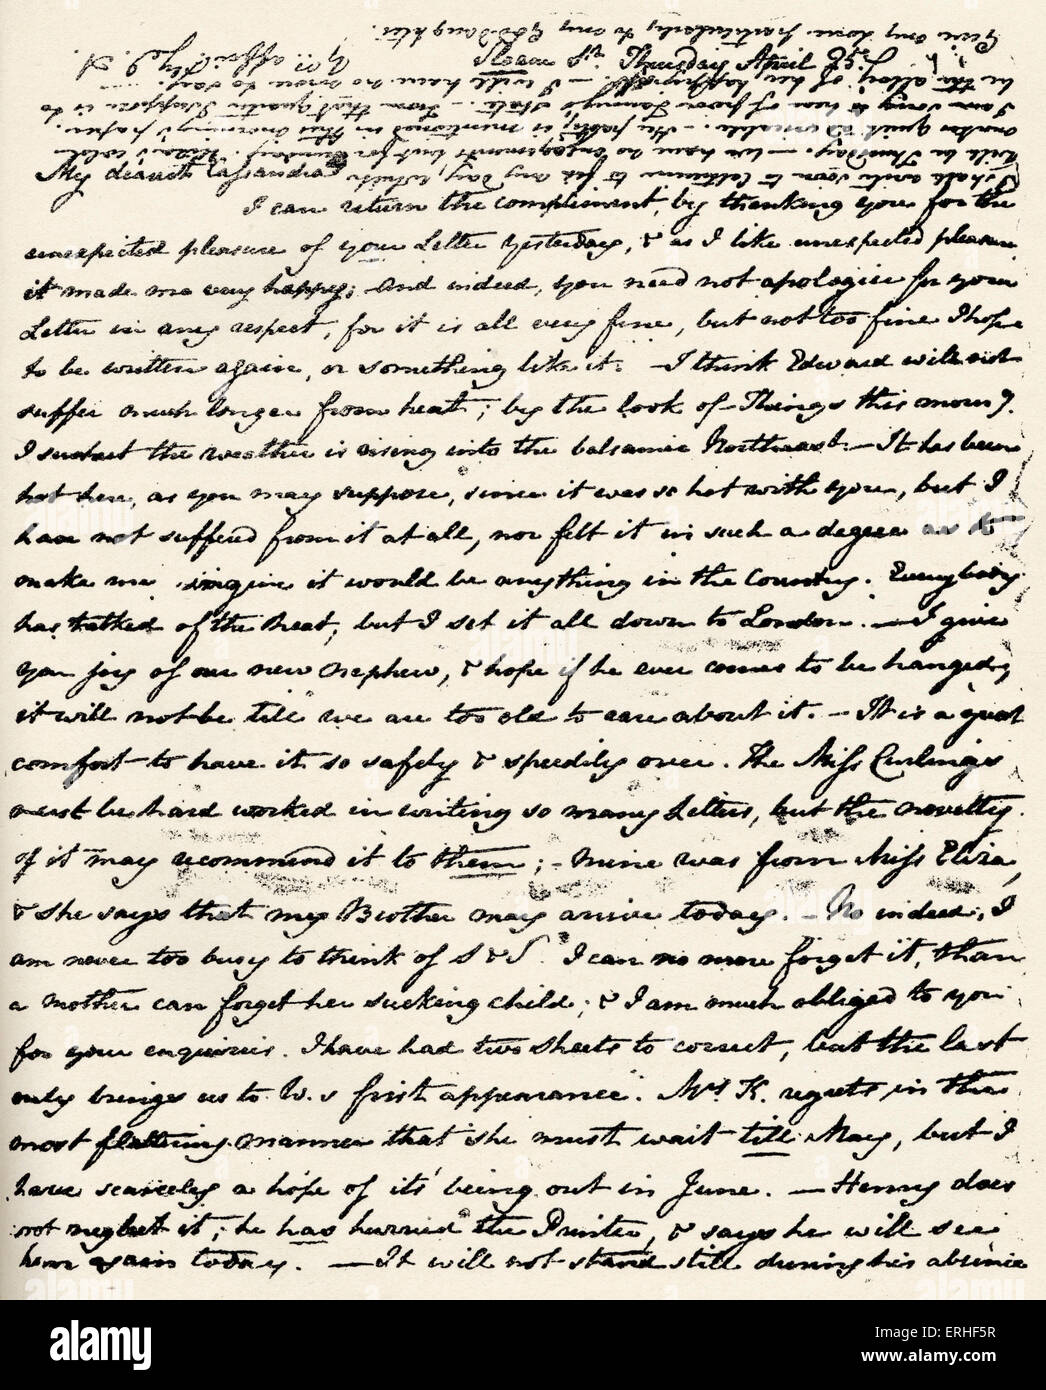 Jane Austen - Letter from English novelist to her sister Cassandra signed with initials on 25 April 16 December 1775 - 18 July Stock Photo